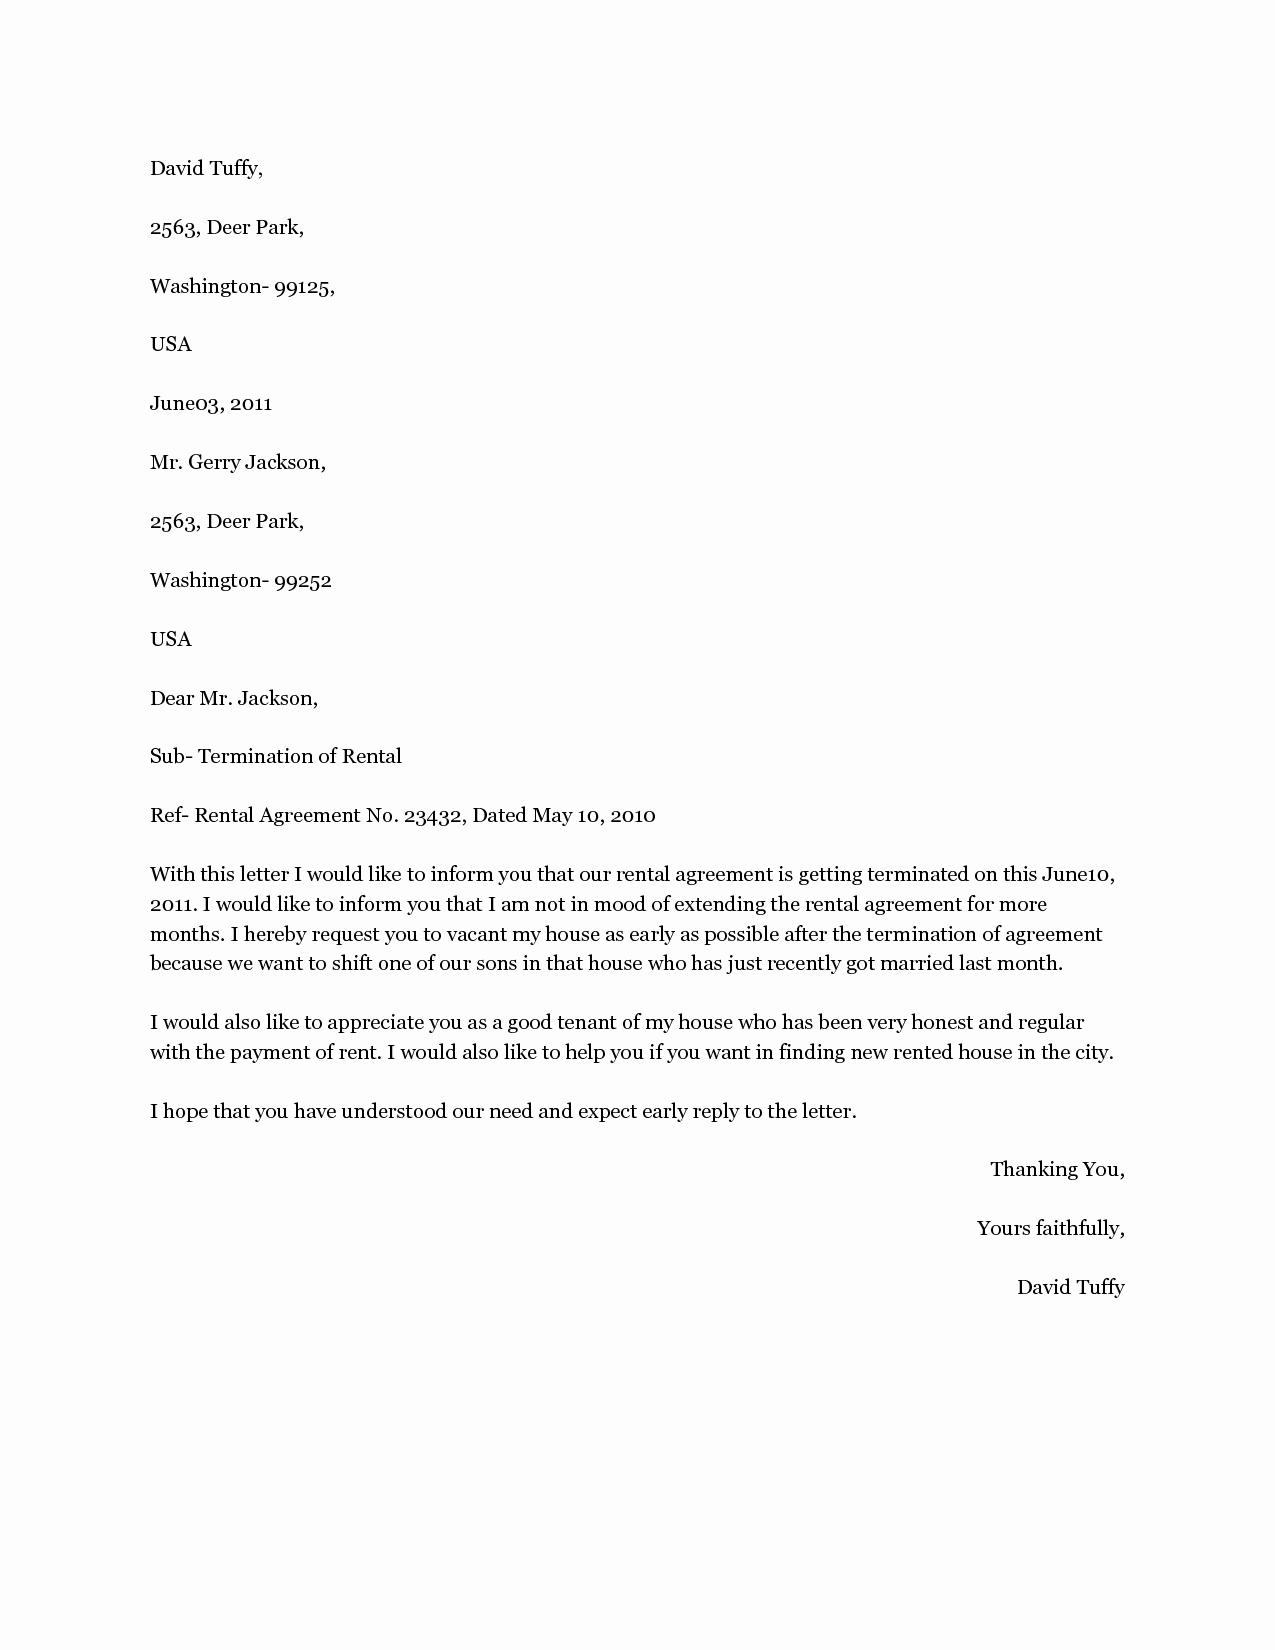 termination of rental agreement letter template example-10 fresh sample independent contractor agreement worddocx 10 fresh sample independent contractor agreement worddocx from ending lease agreement letter 11-q